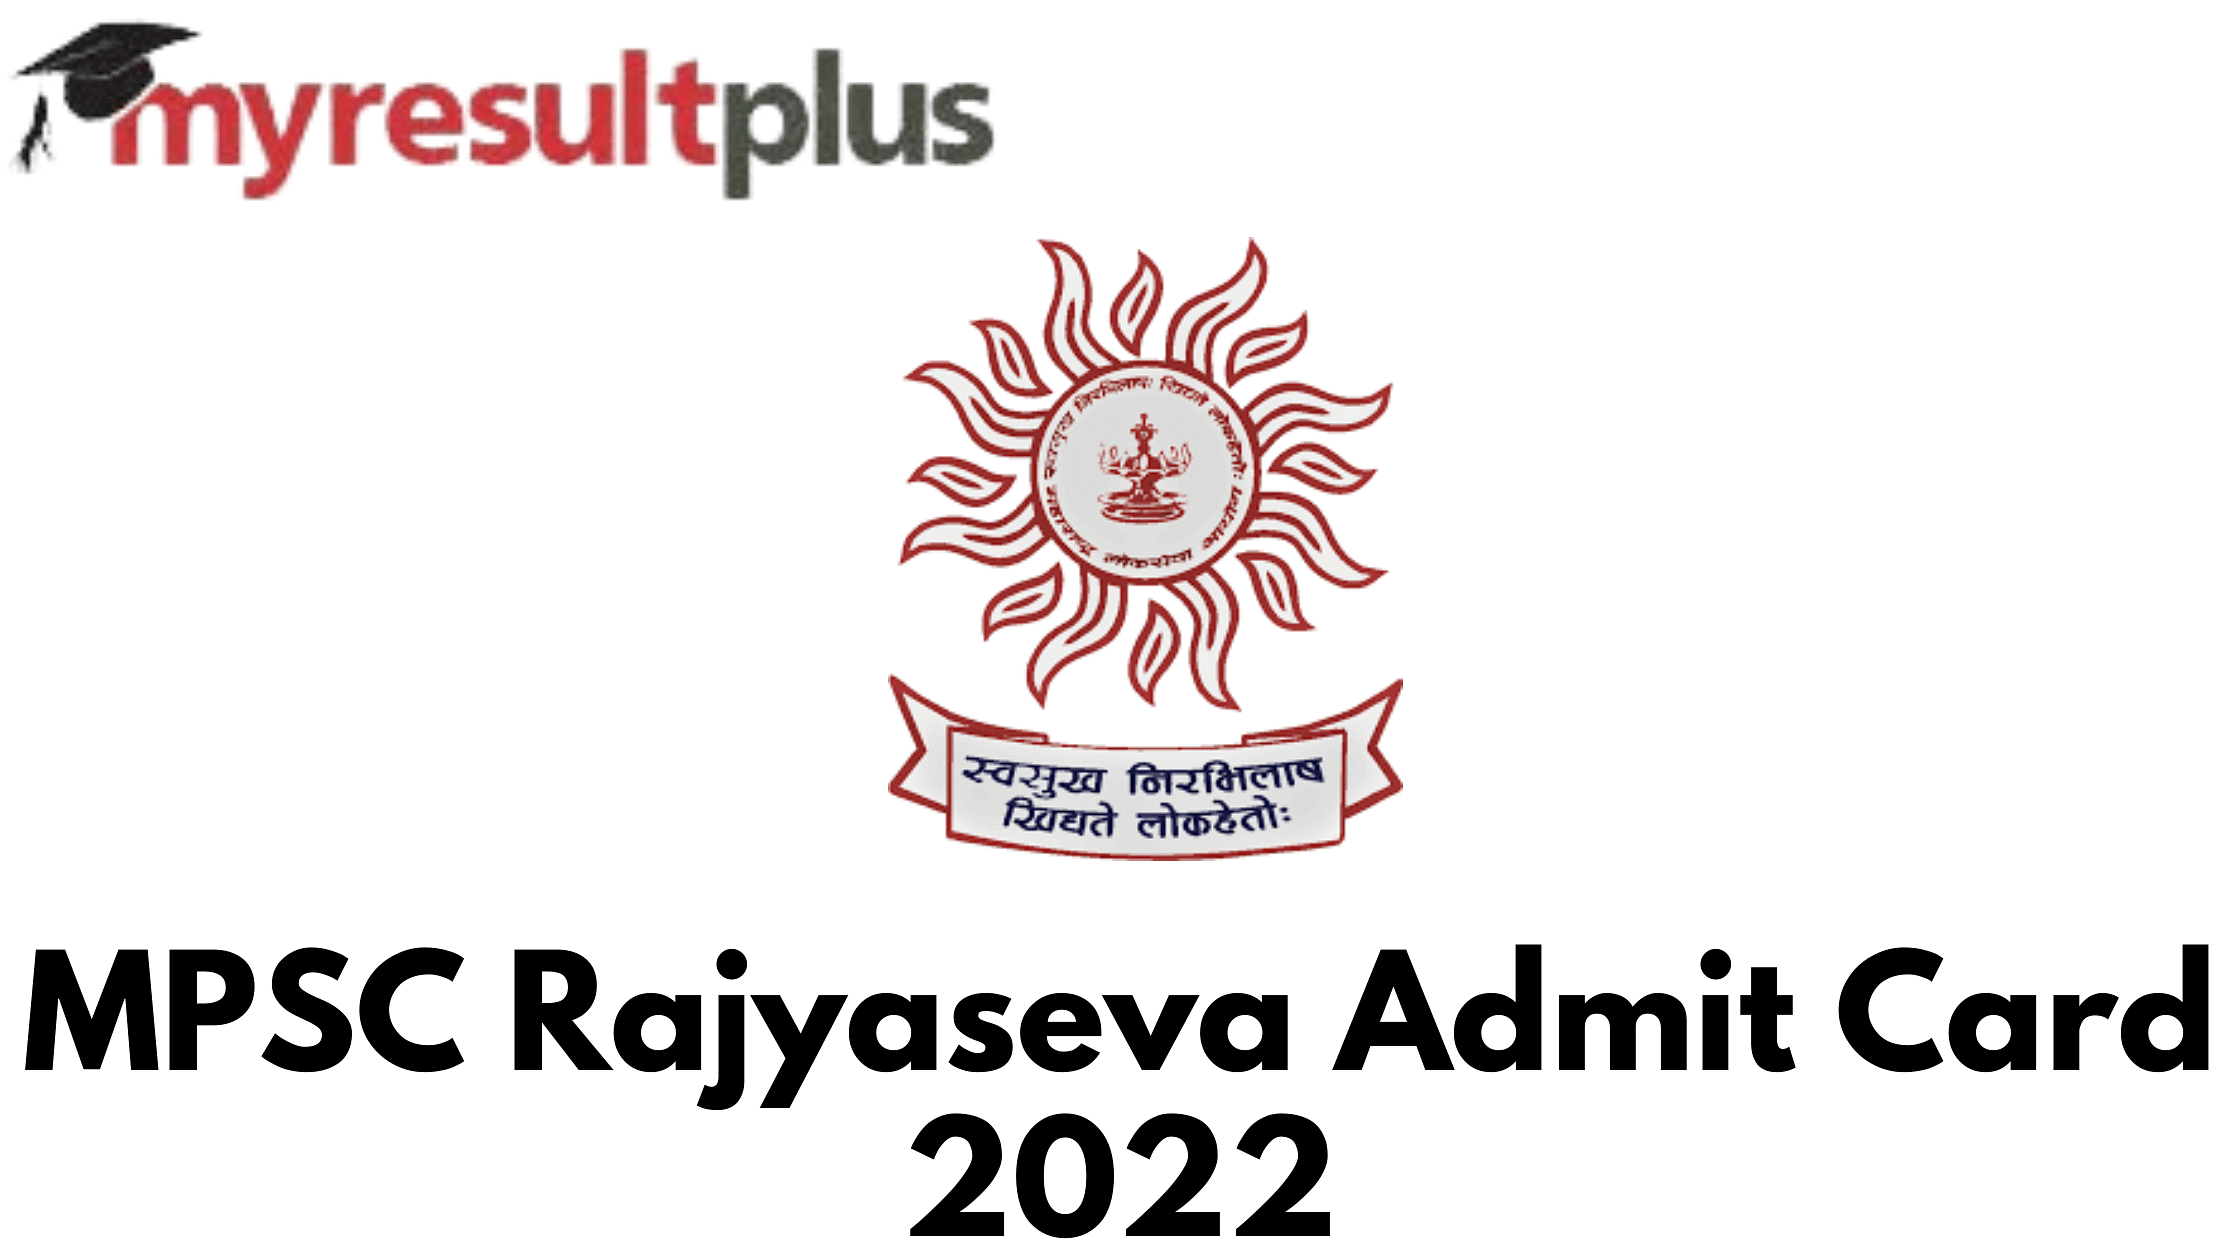 MPSC Rajyaseva Admit Card 2022 Released for Prelims, Here's Direct Link to Download